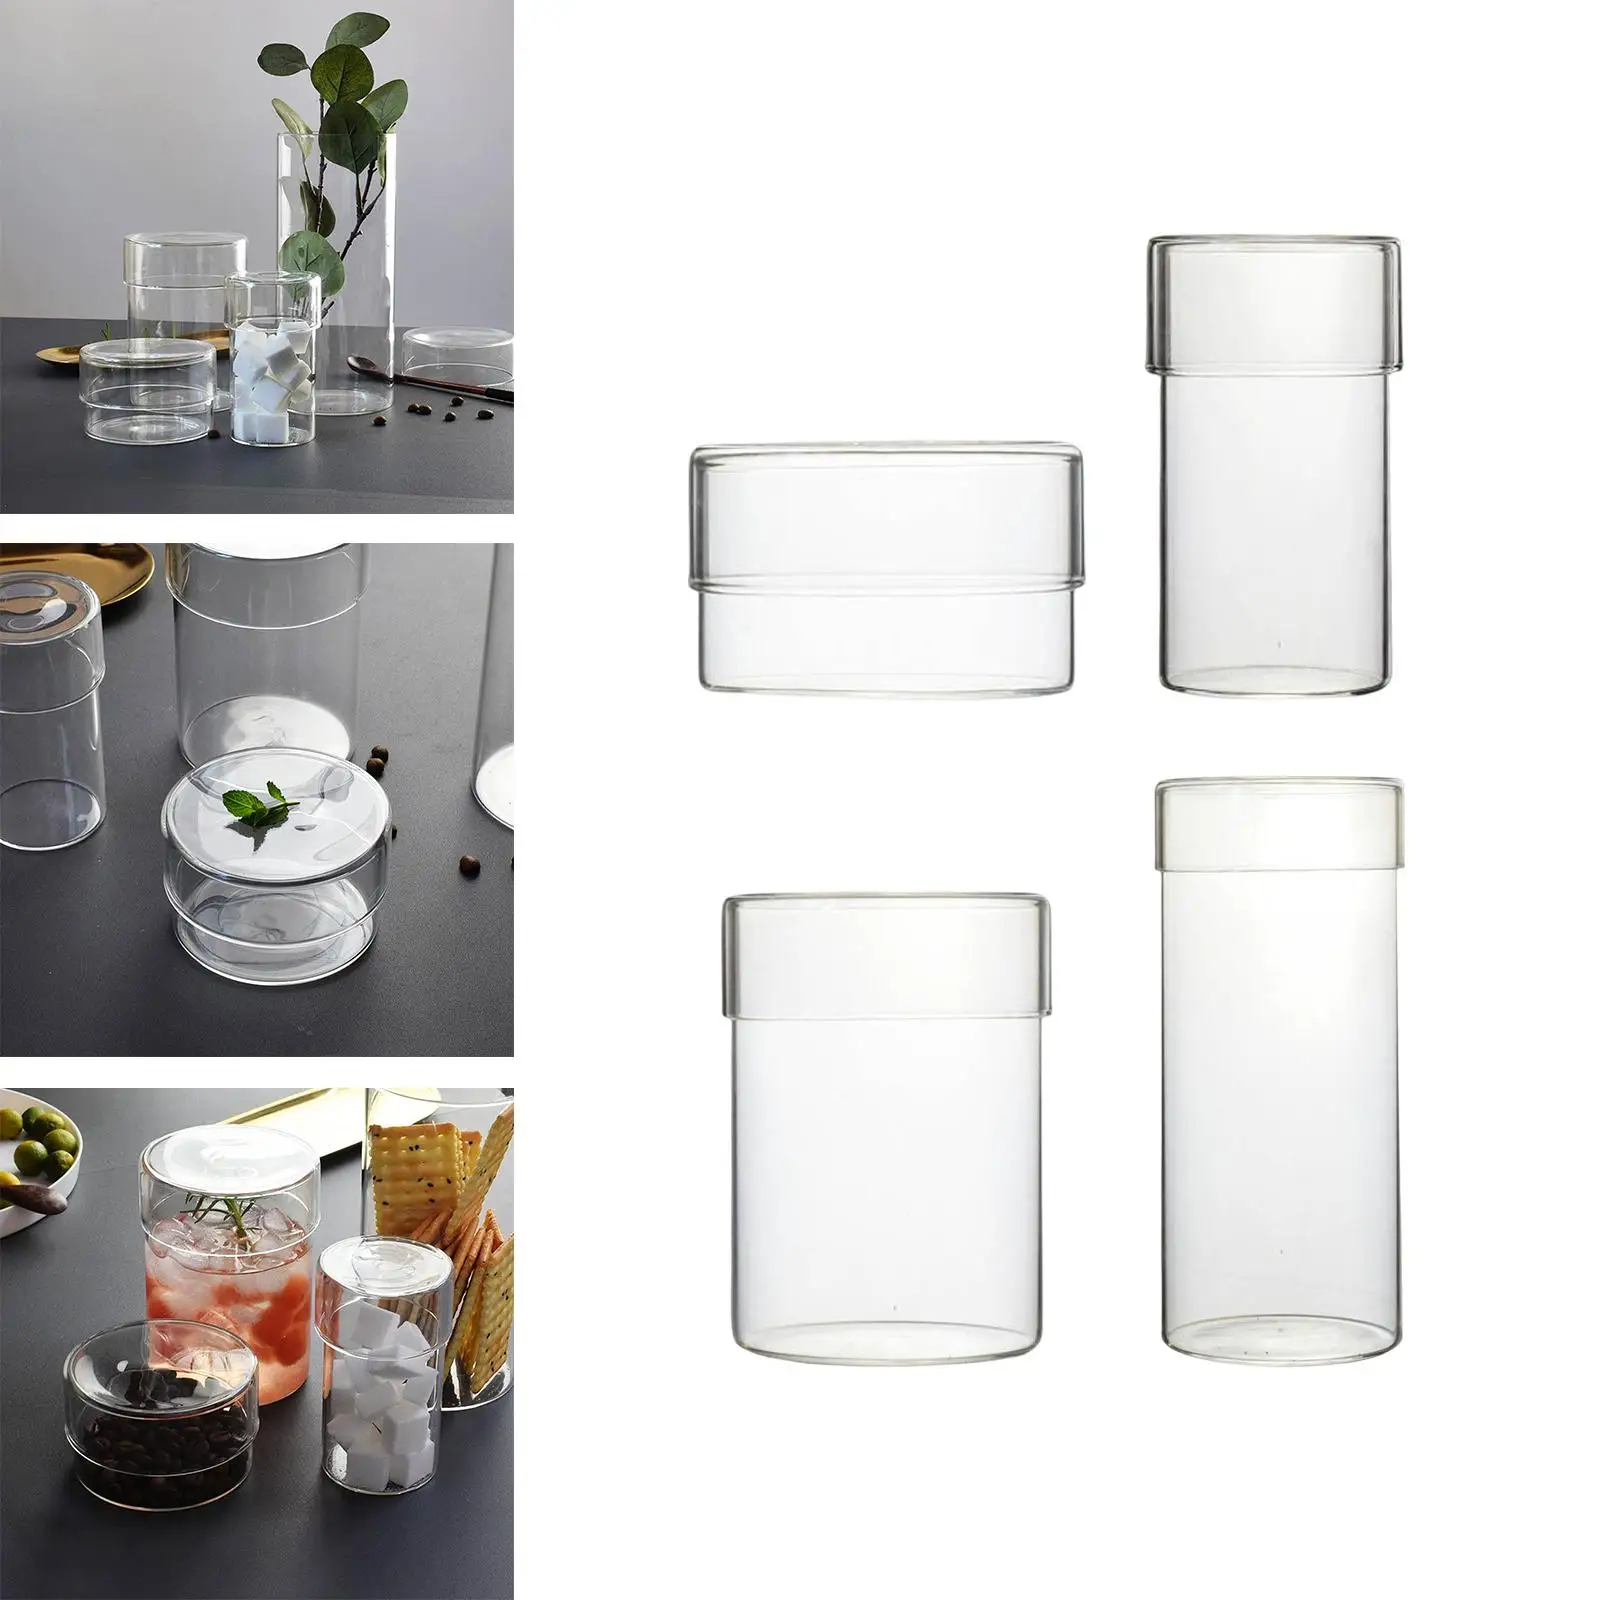 Glass Food Storage Container for Kitchen with Lids Seasoning Spice Jars Pantry Organization Airtight Food Jars Bottle